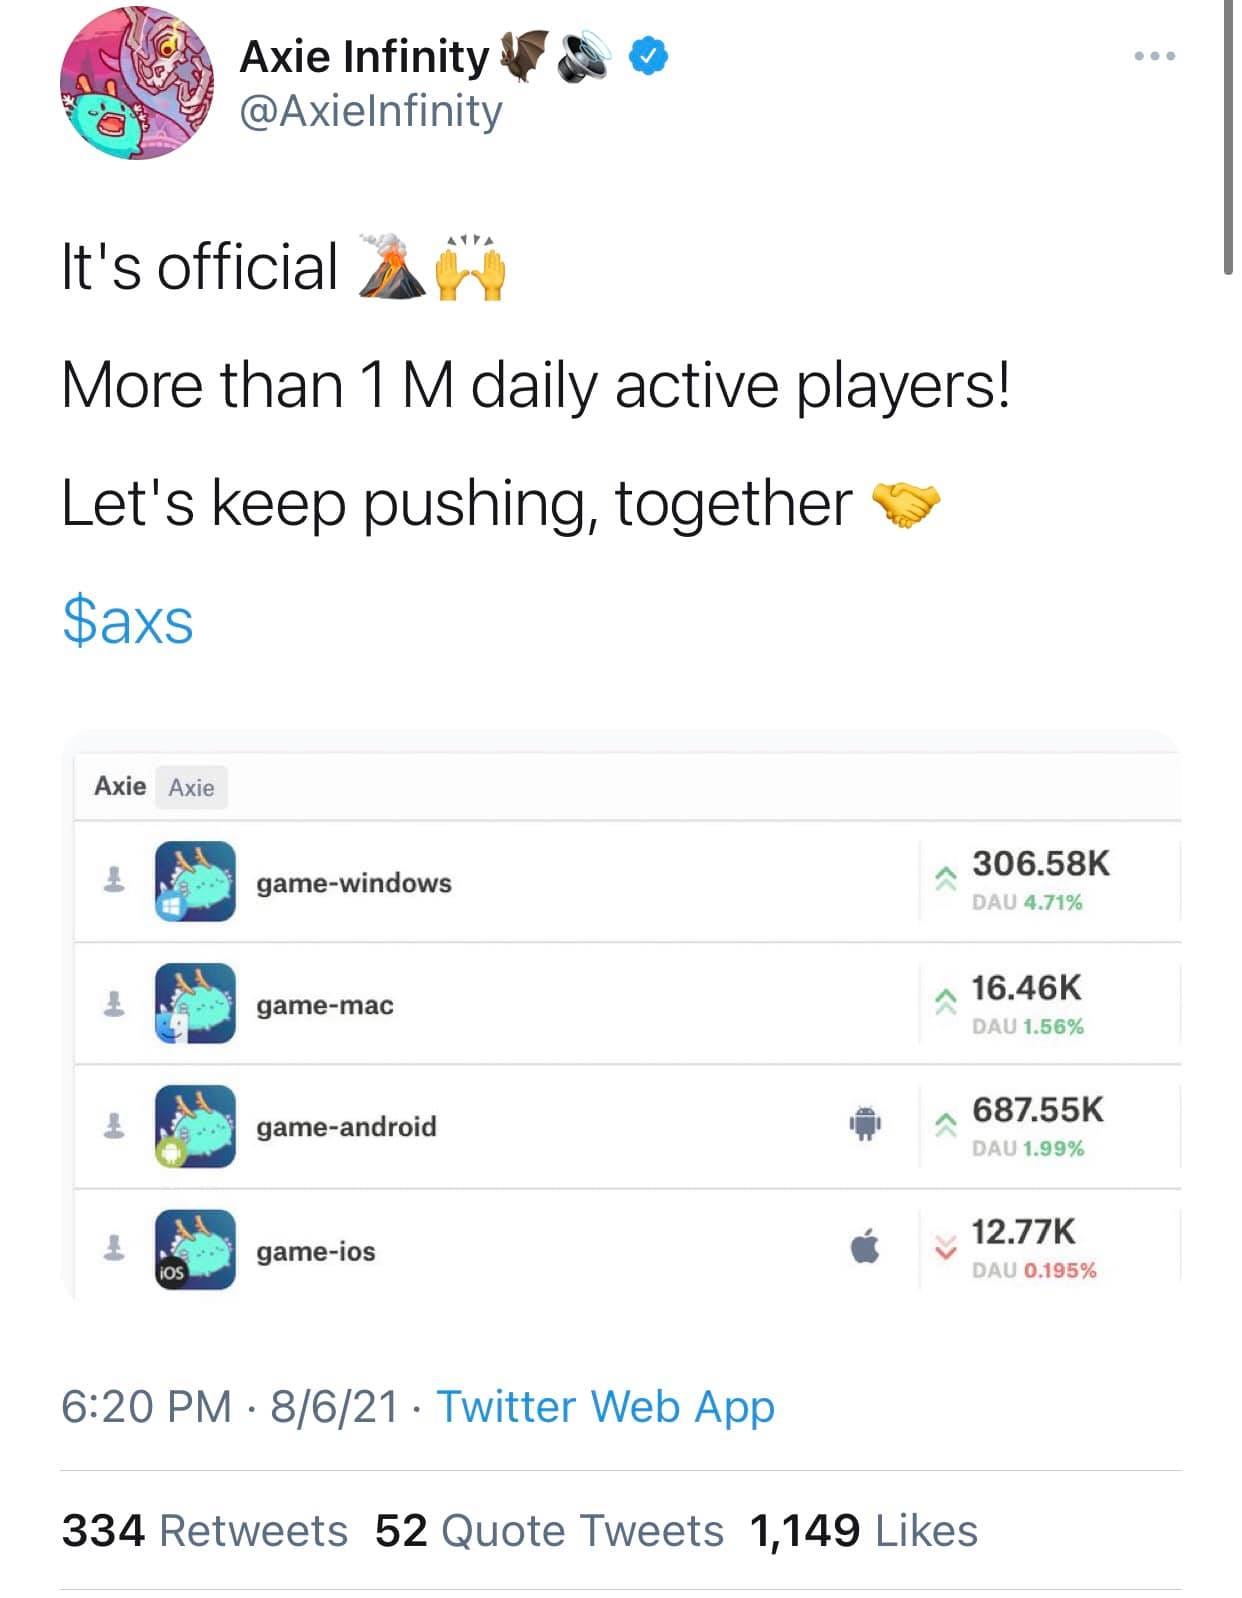 May be an image of text that says 'Axie Infinity @Axielnfinity It's official More than 1 M daily active players! Let's keep pushing, together $axs Axie Axie game-windows game-mac ì 306.58K DAU 4.71% game-android 16.46K DAU 1.56% game-ios 687.55K DAU1.99% DAU 12.77K DAU 0.195% 6:20 PM 8/6/21 Twitter Web App 334 Retweets 52 Quote Tweets 1,149 Likes'